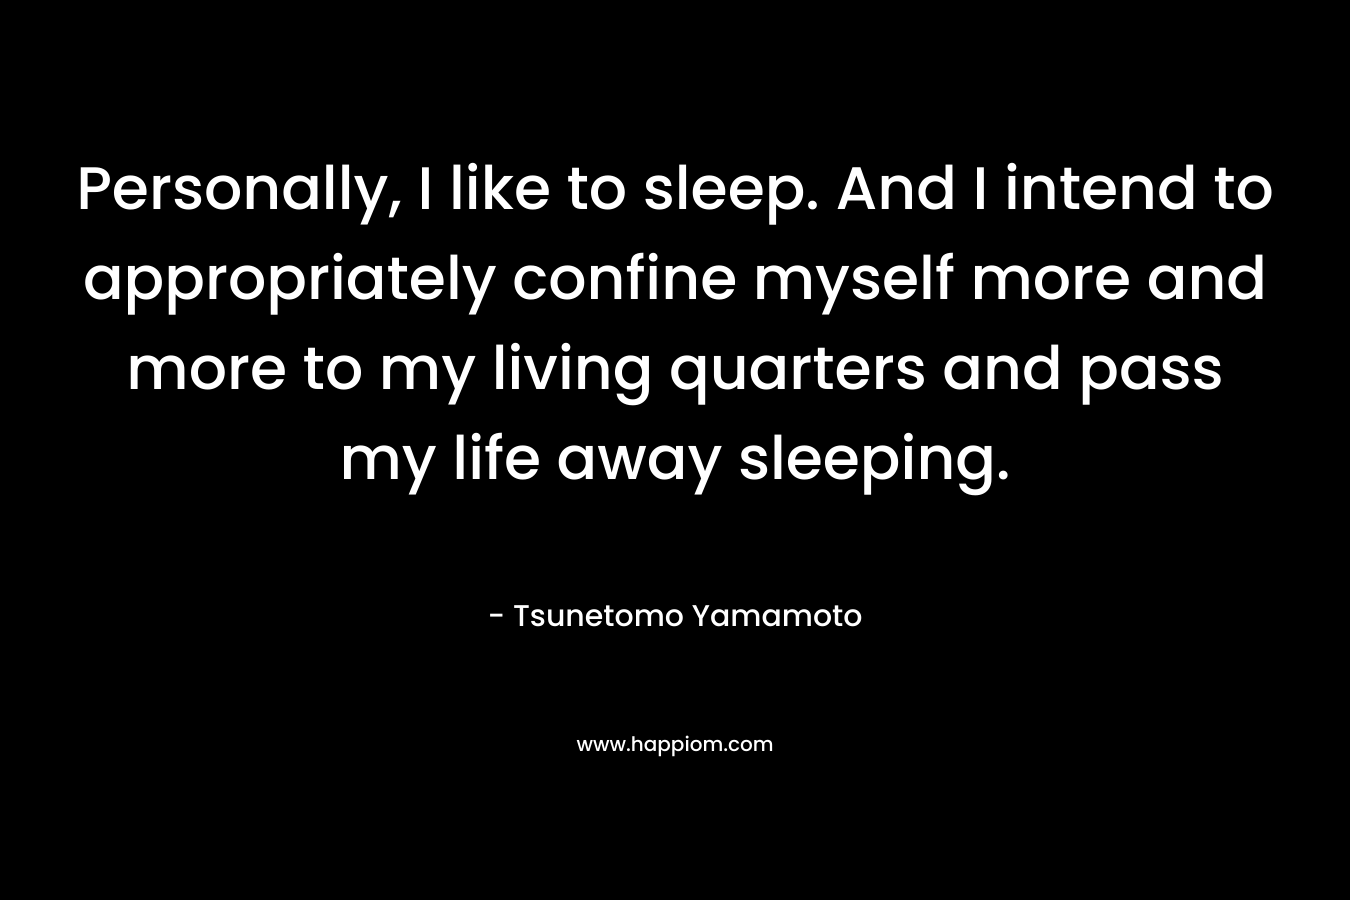 Personally, I like to sleep. And I intend to appropriately confine myself more and more to my living quarters and pass my life away sleeping.